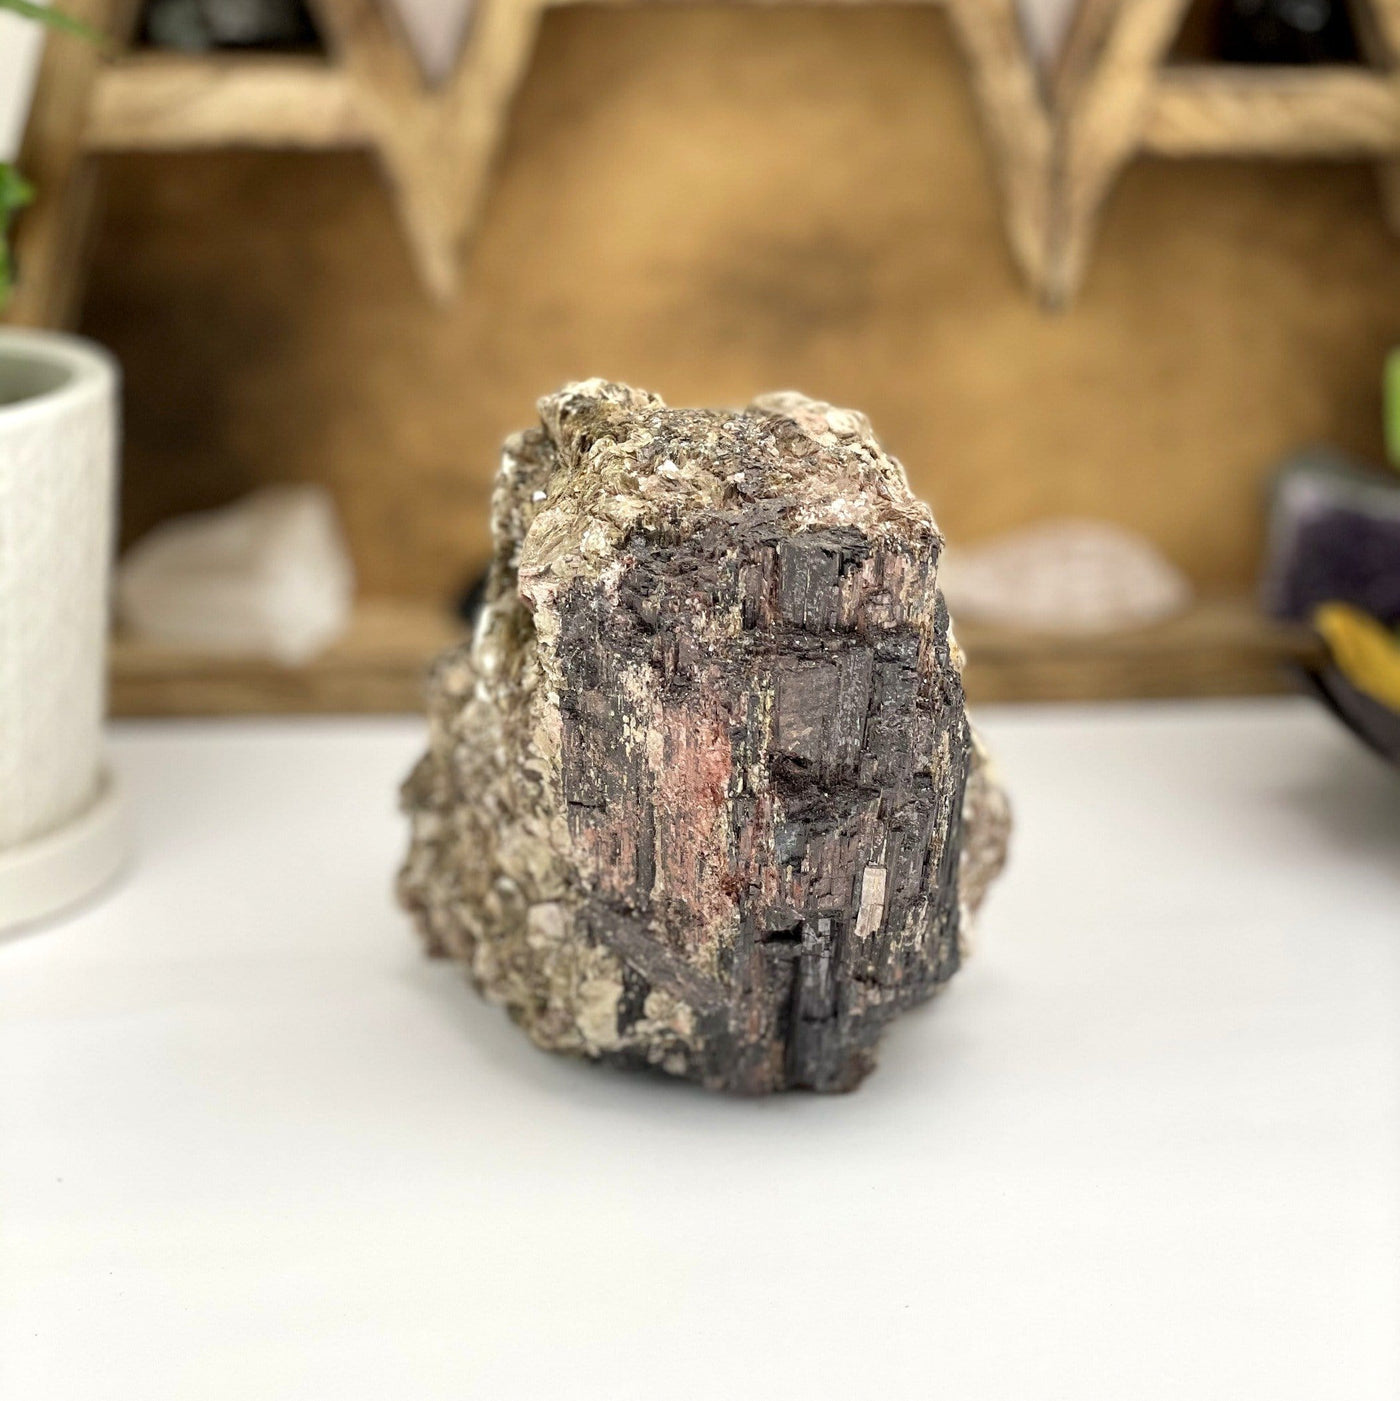 Black Tourmaline with decorations in the background